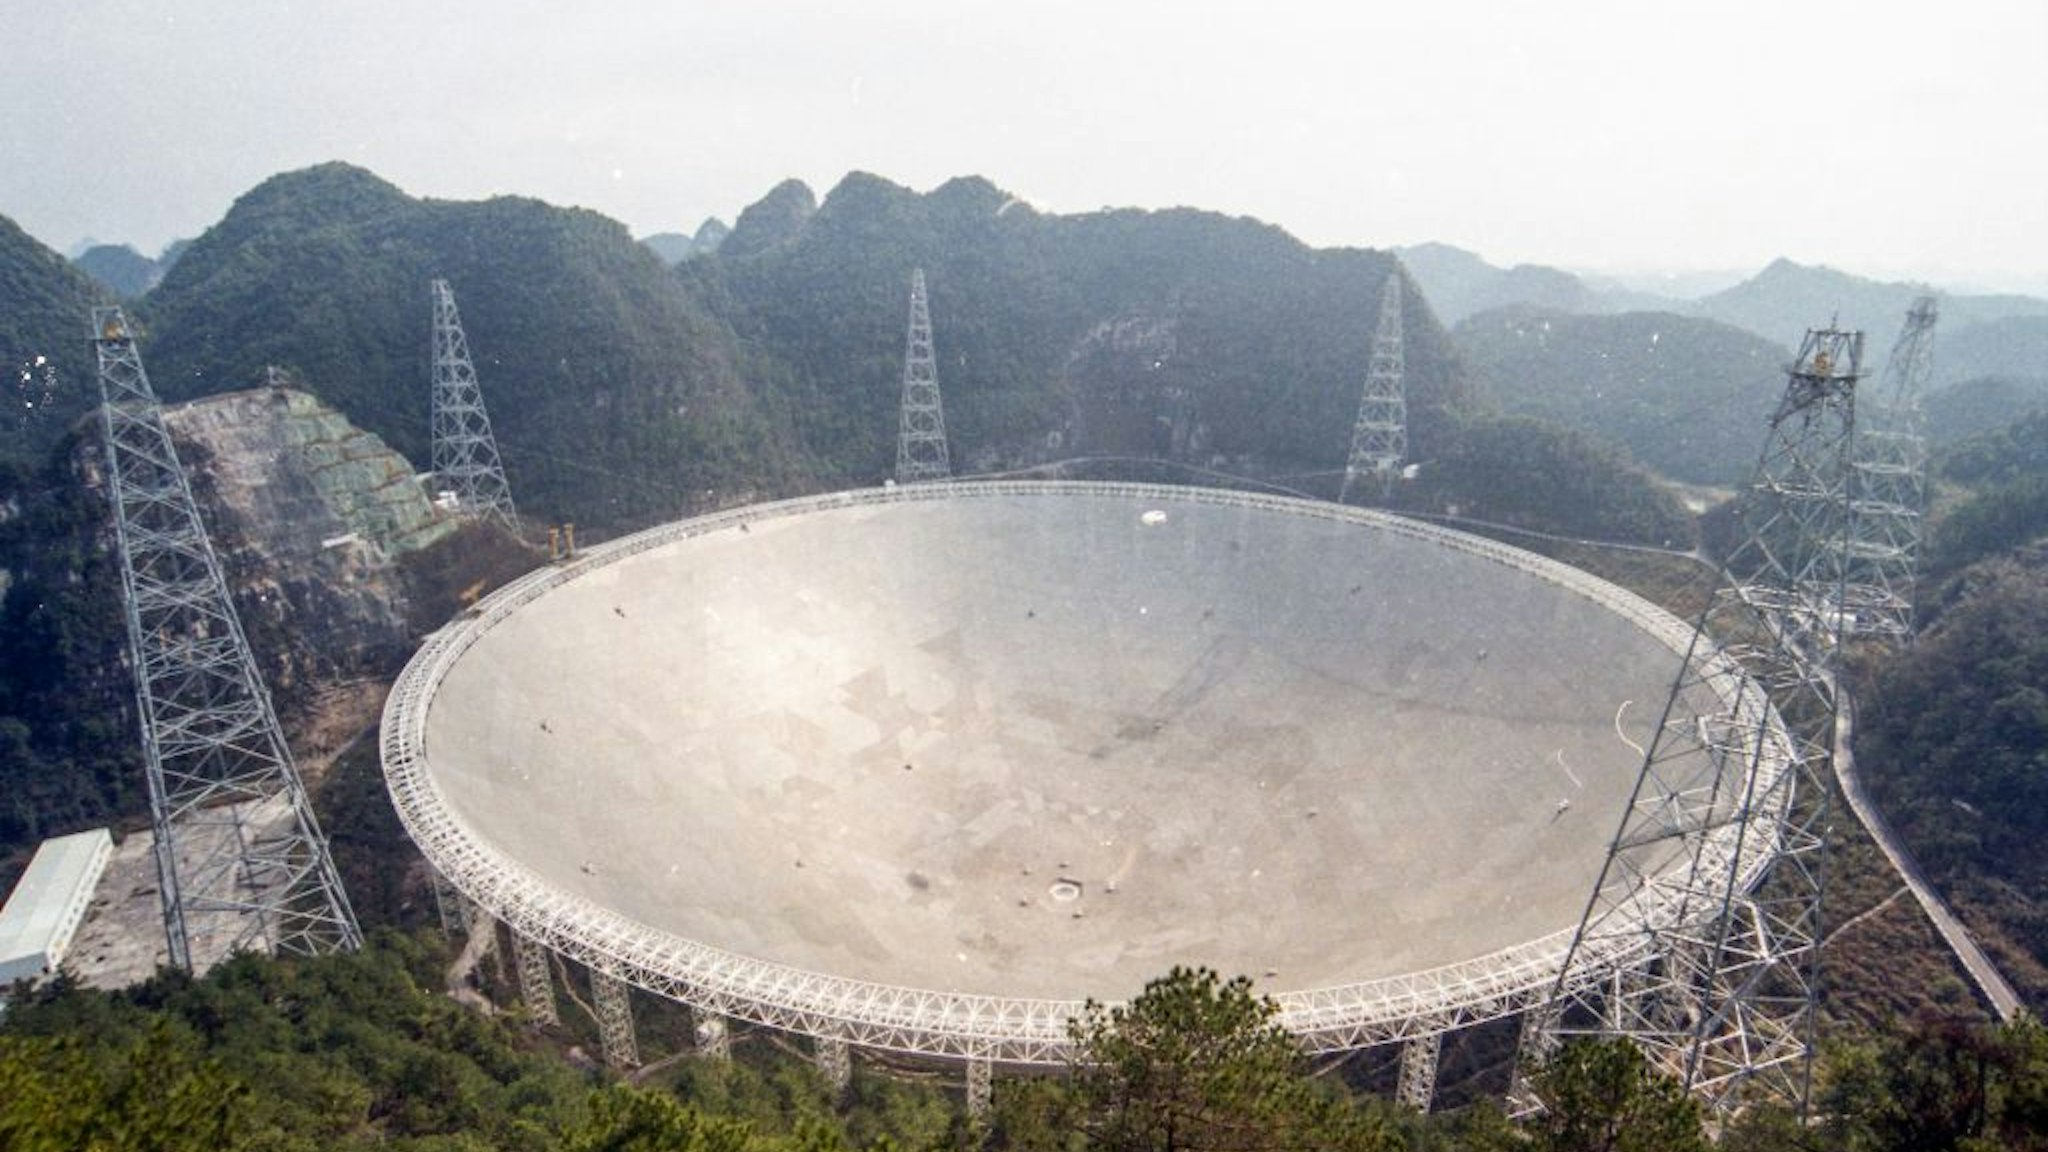 QIANNAN, CHINA - FEBRUARY 07: Aerial view of the Five-hundred-meter Aperture Spherical radio Telescope (FAST) at Pingtang County on February 7, 2021 in Qiannan Buyei and Miao Autonomous Prefecture, Guizhou Province of China. The 500-meter aperture spherical radio telescope (FAST), also known as China's 'Sky Eye', will open to global scientific community from April 1.